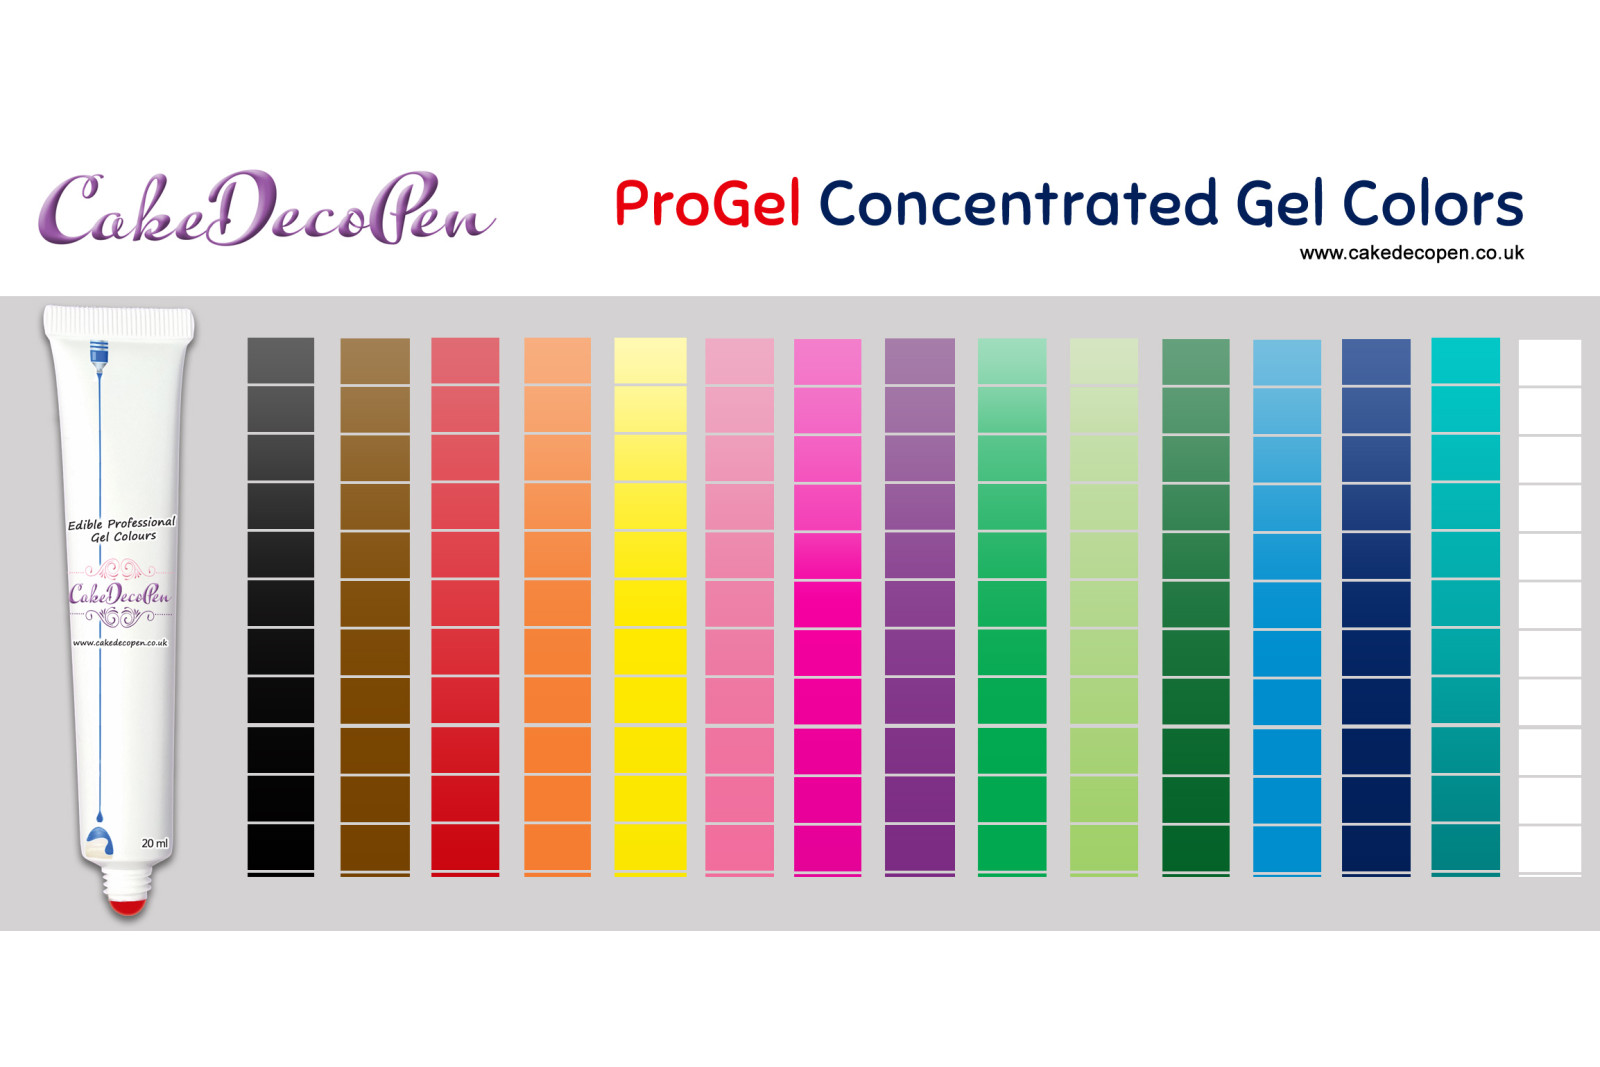 White | Gel Food Colors | Concentrated ProGel | Cake Decorating | 30 ML